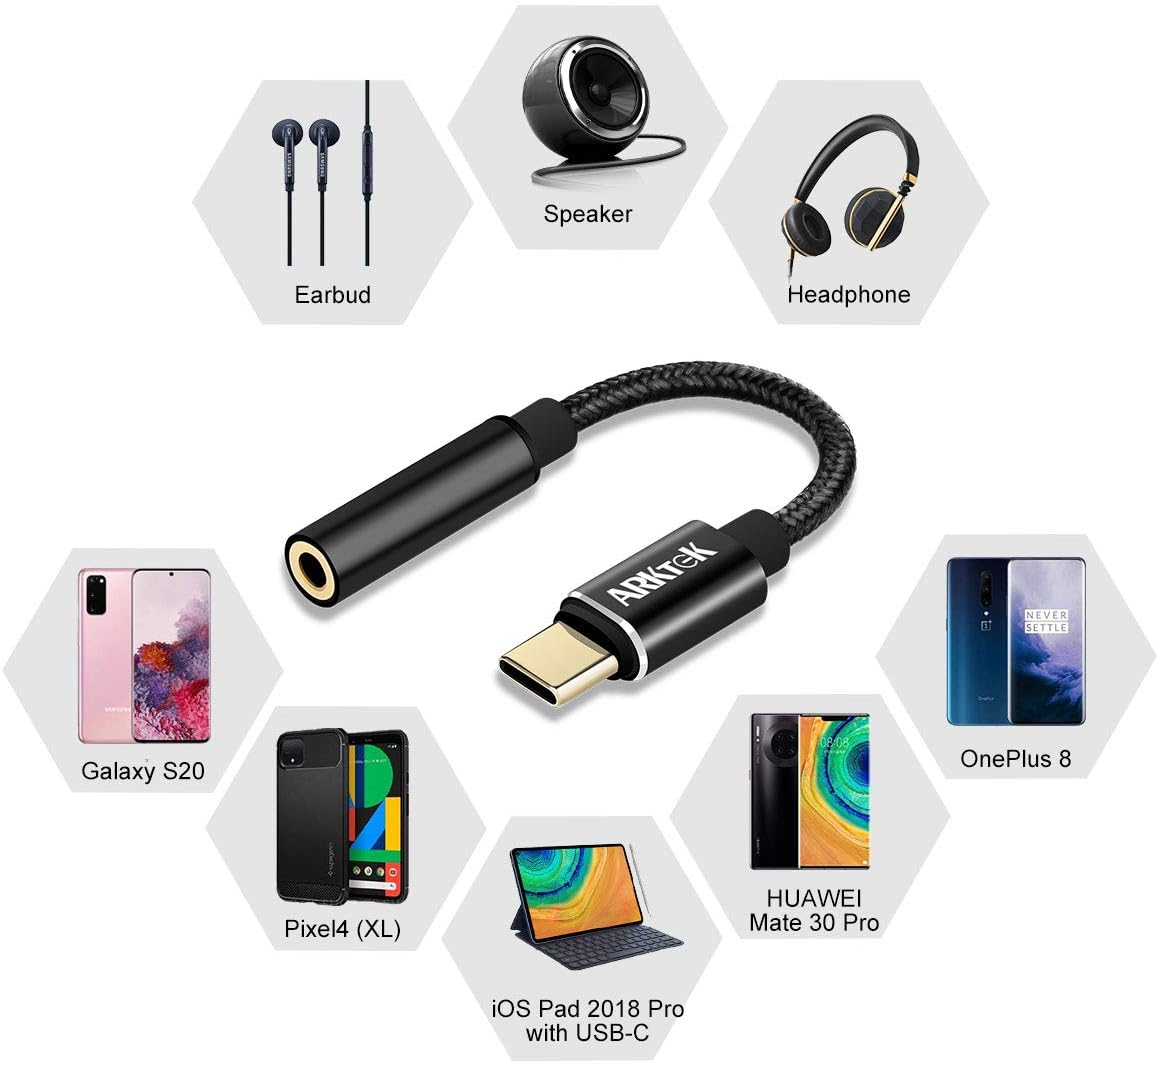 USB C to 3.5MM Audio Adapter USB Type C to AUX Headphone Jack Hi-Res DAC Cable Adapter for Pixel 4 Galaxy S20 OnePlus 7T and More 